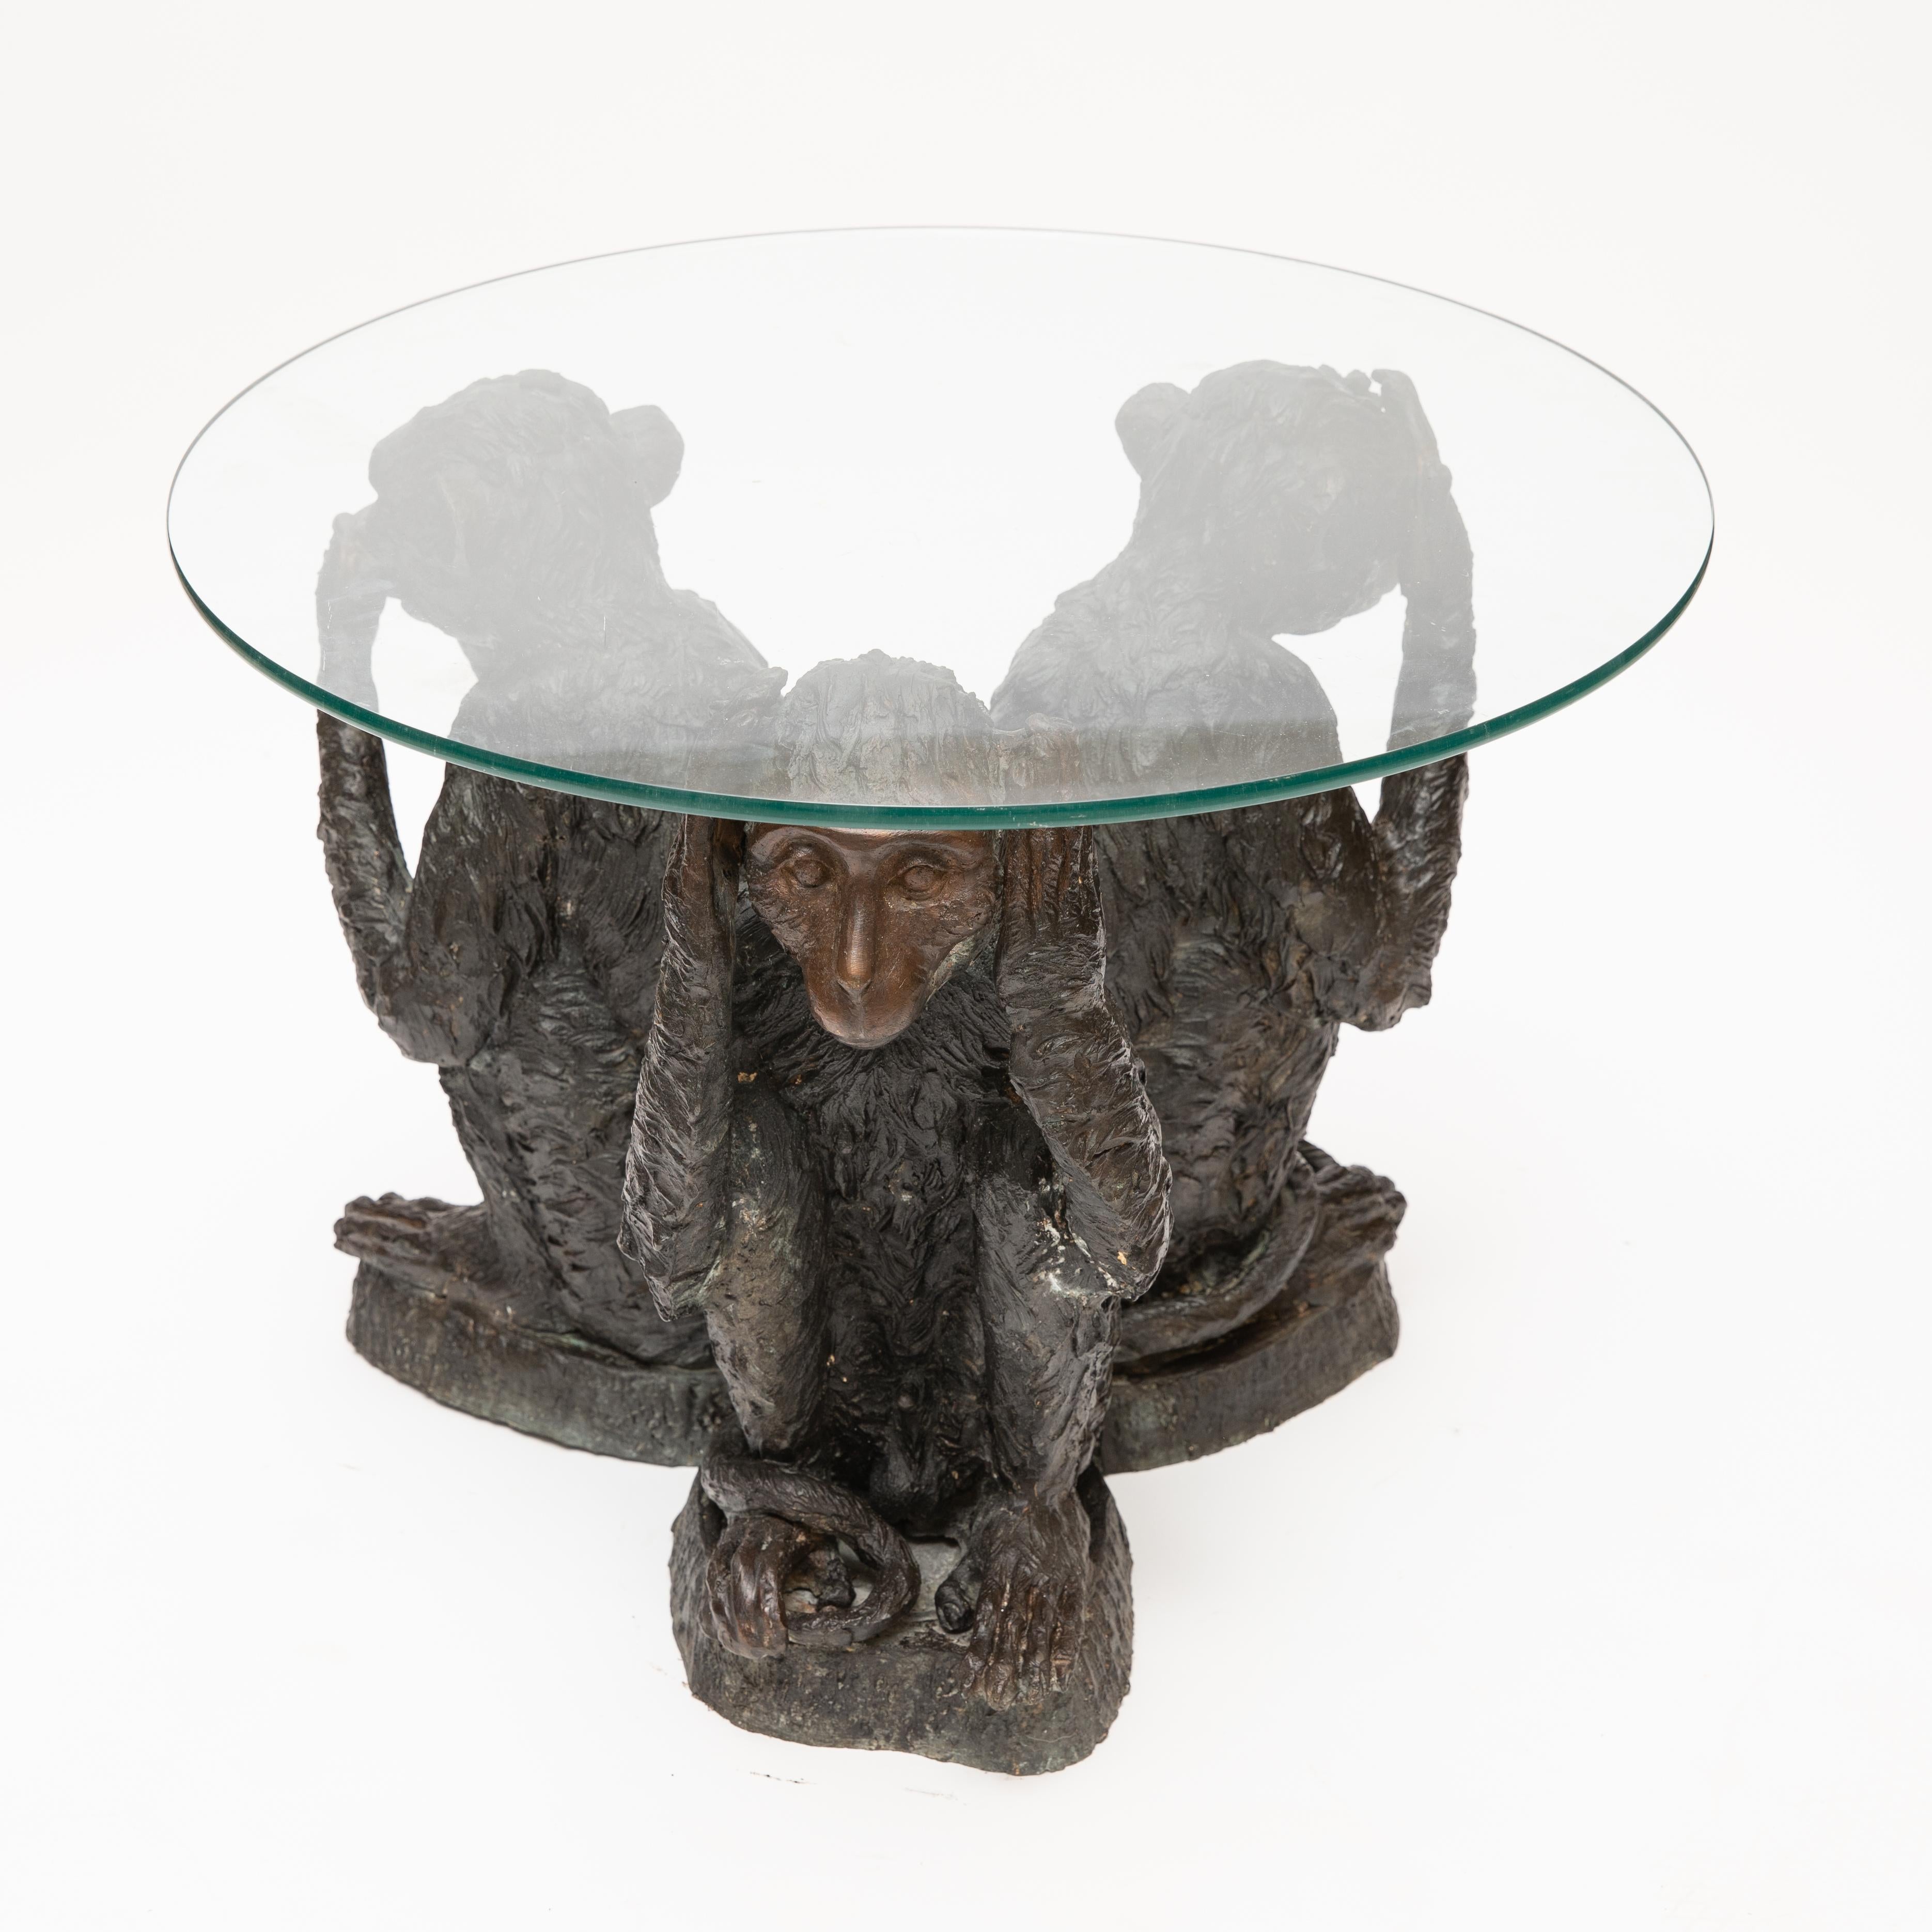 Midcentury bronze monkey based table with glass top. The table depicts the three wise monkeys embodying the proverbial principle 